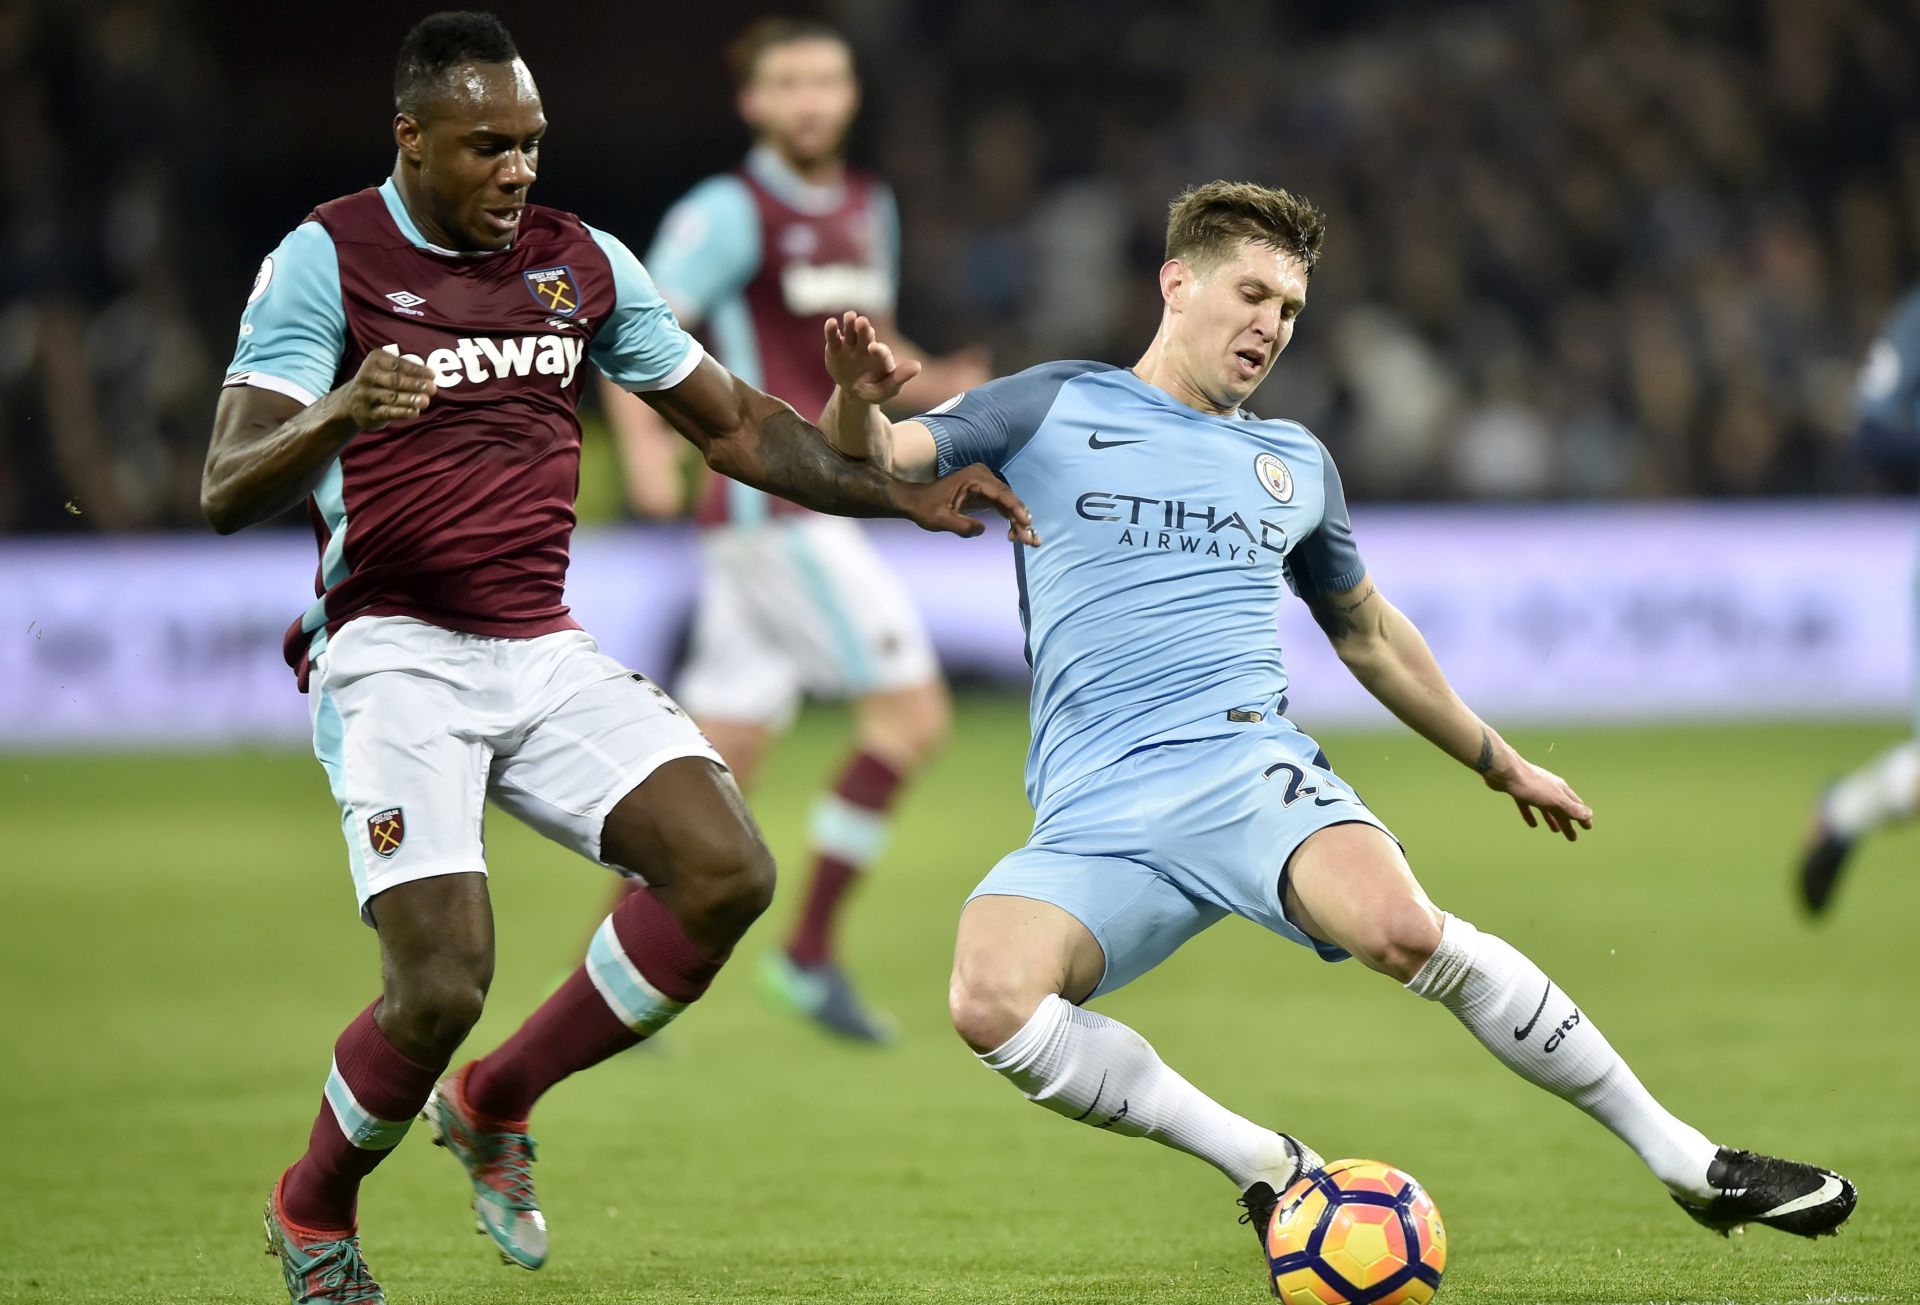 epa05765462 West Ham United's Michail Antonio (L) vies for the Ball with Manchester City's John Stones (R) during the English Premier League soccer match between West Ham and Manchester City at the London Stadium in London, Britain, 01 February 2017. 
EDITORIAL USE ONLY. No use with unauthorized audio, video, data, fixture lists, club/league logos or 'live' services. Online in-match use limited to 75 images, no video emulation. No use in betting, games or single club/league/player publications  EPA/HANNAH MCKAY